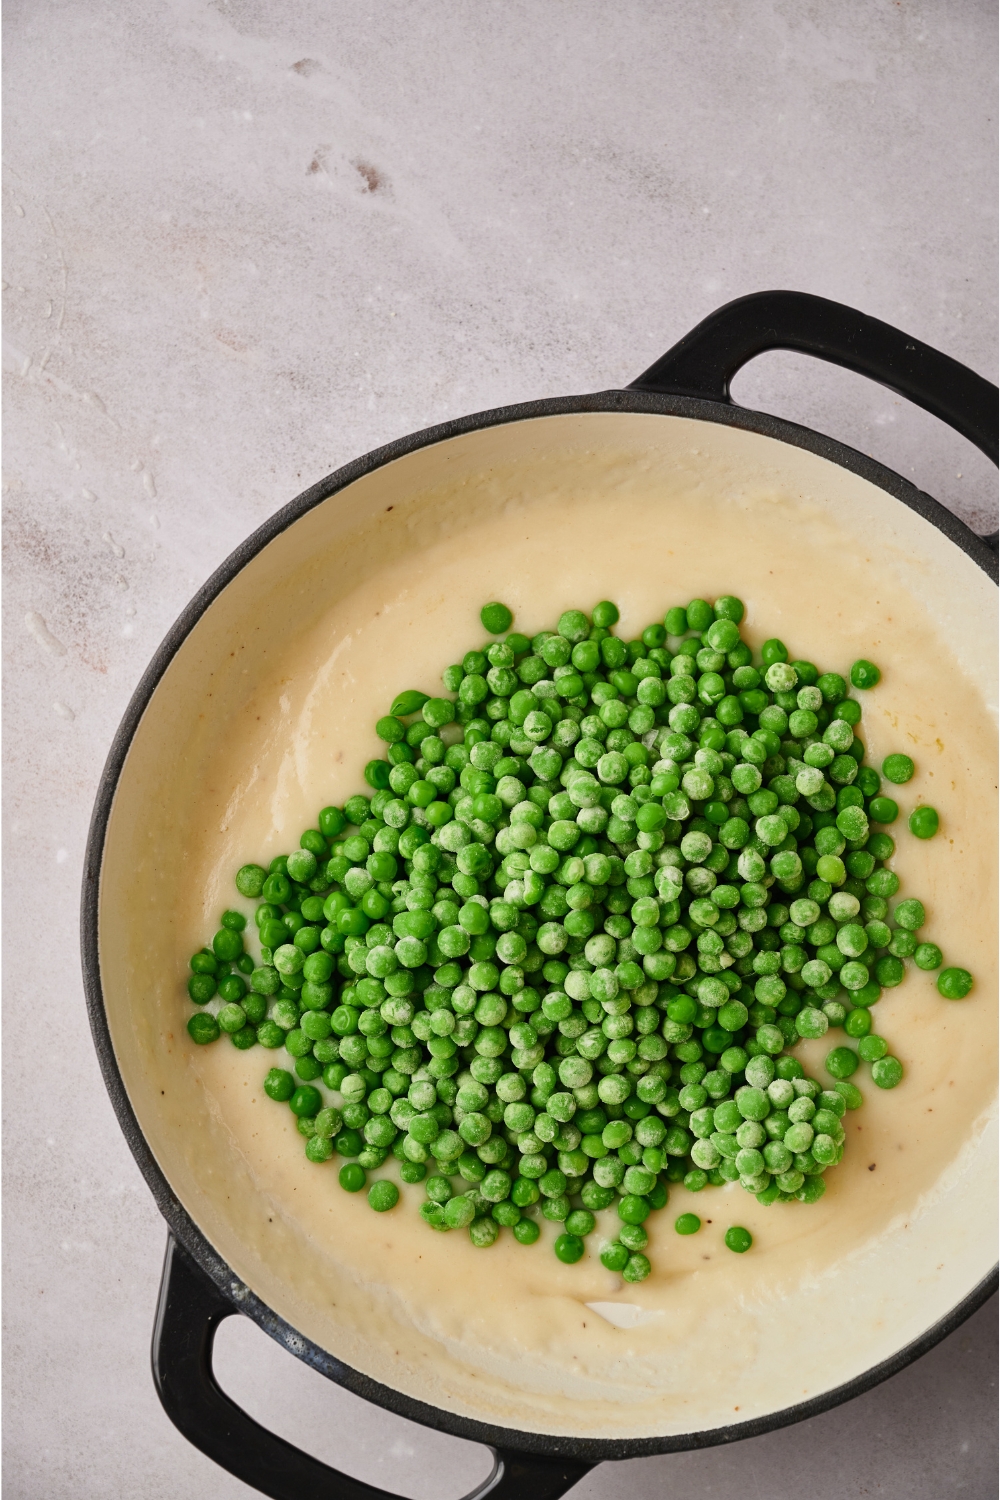 A skillet with the peas being added to the white sauce.